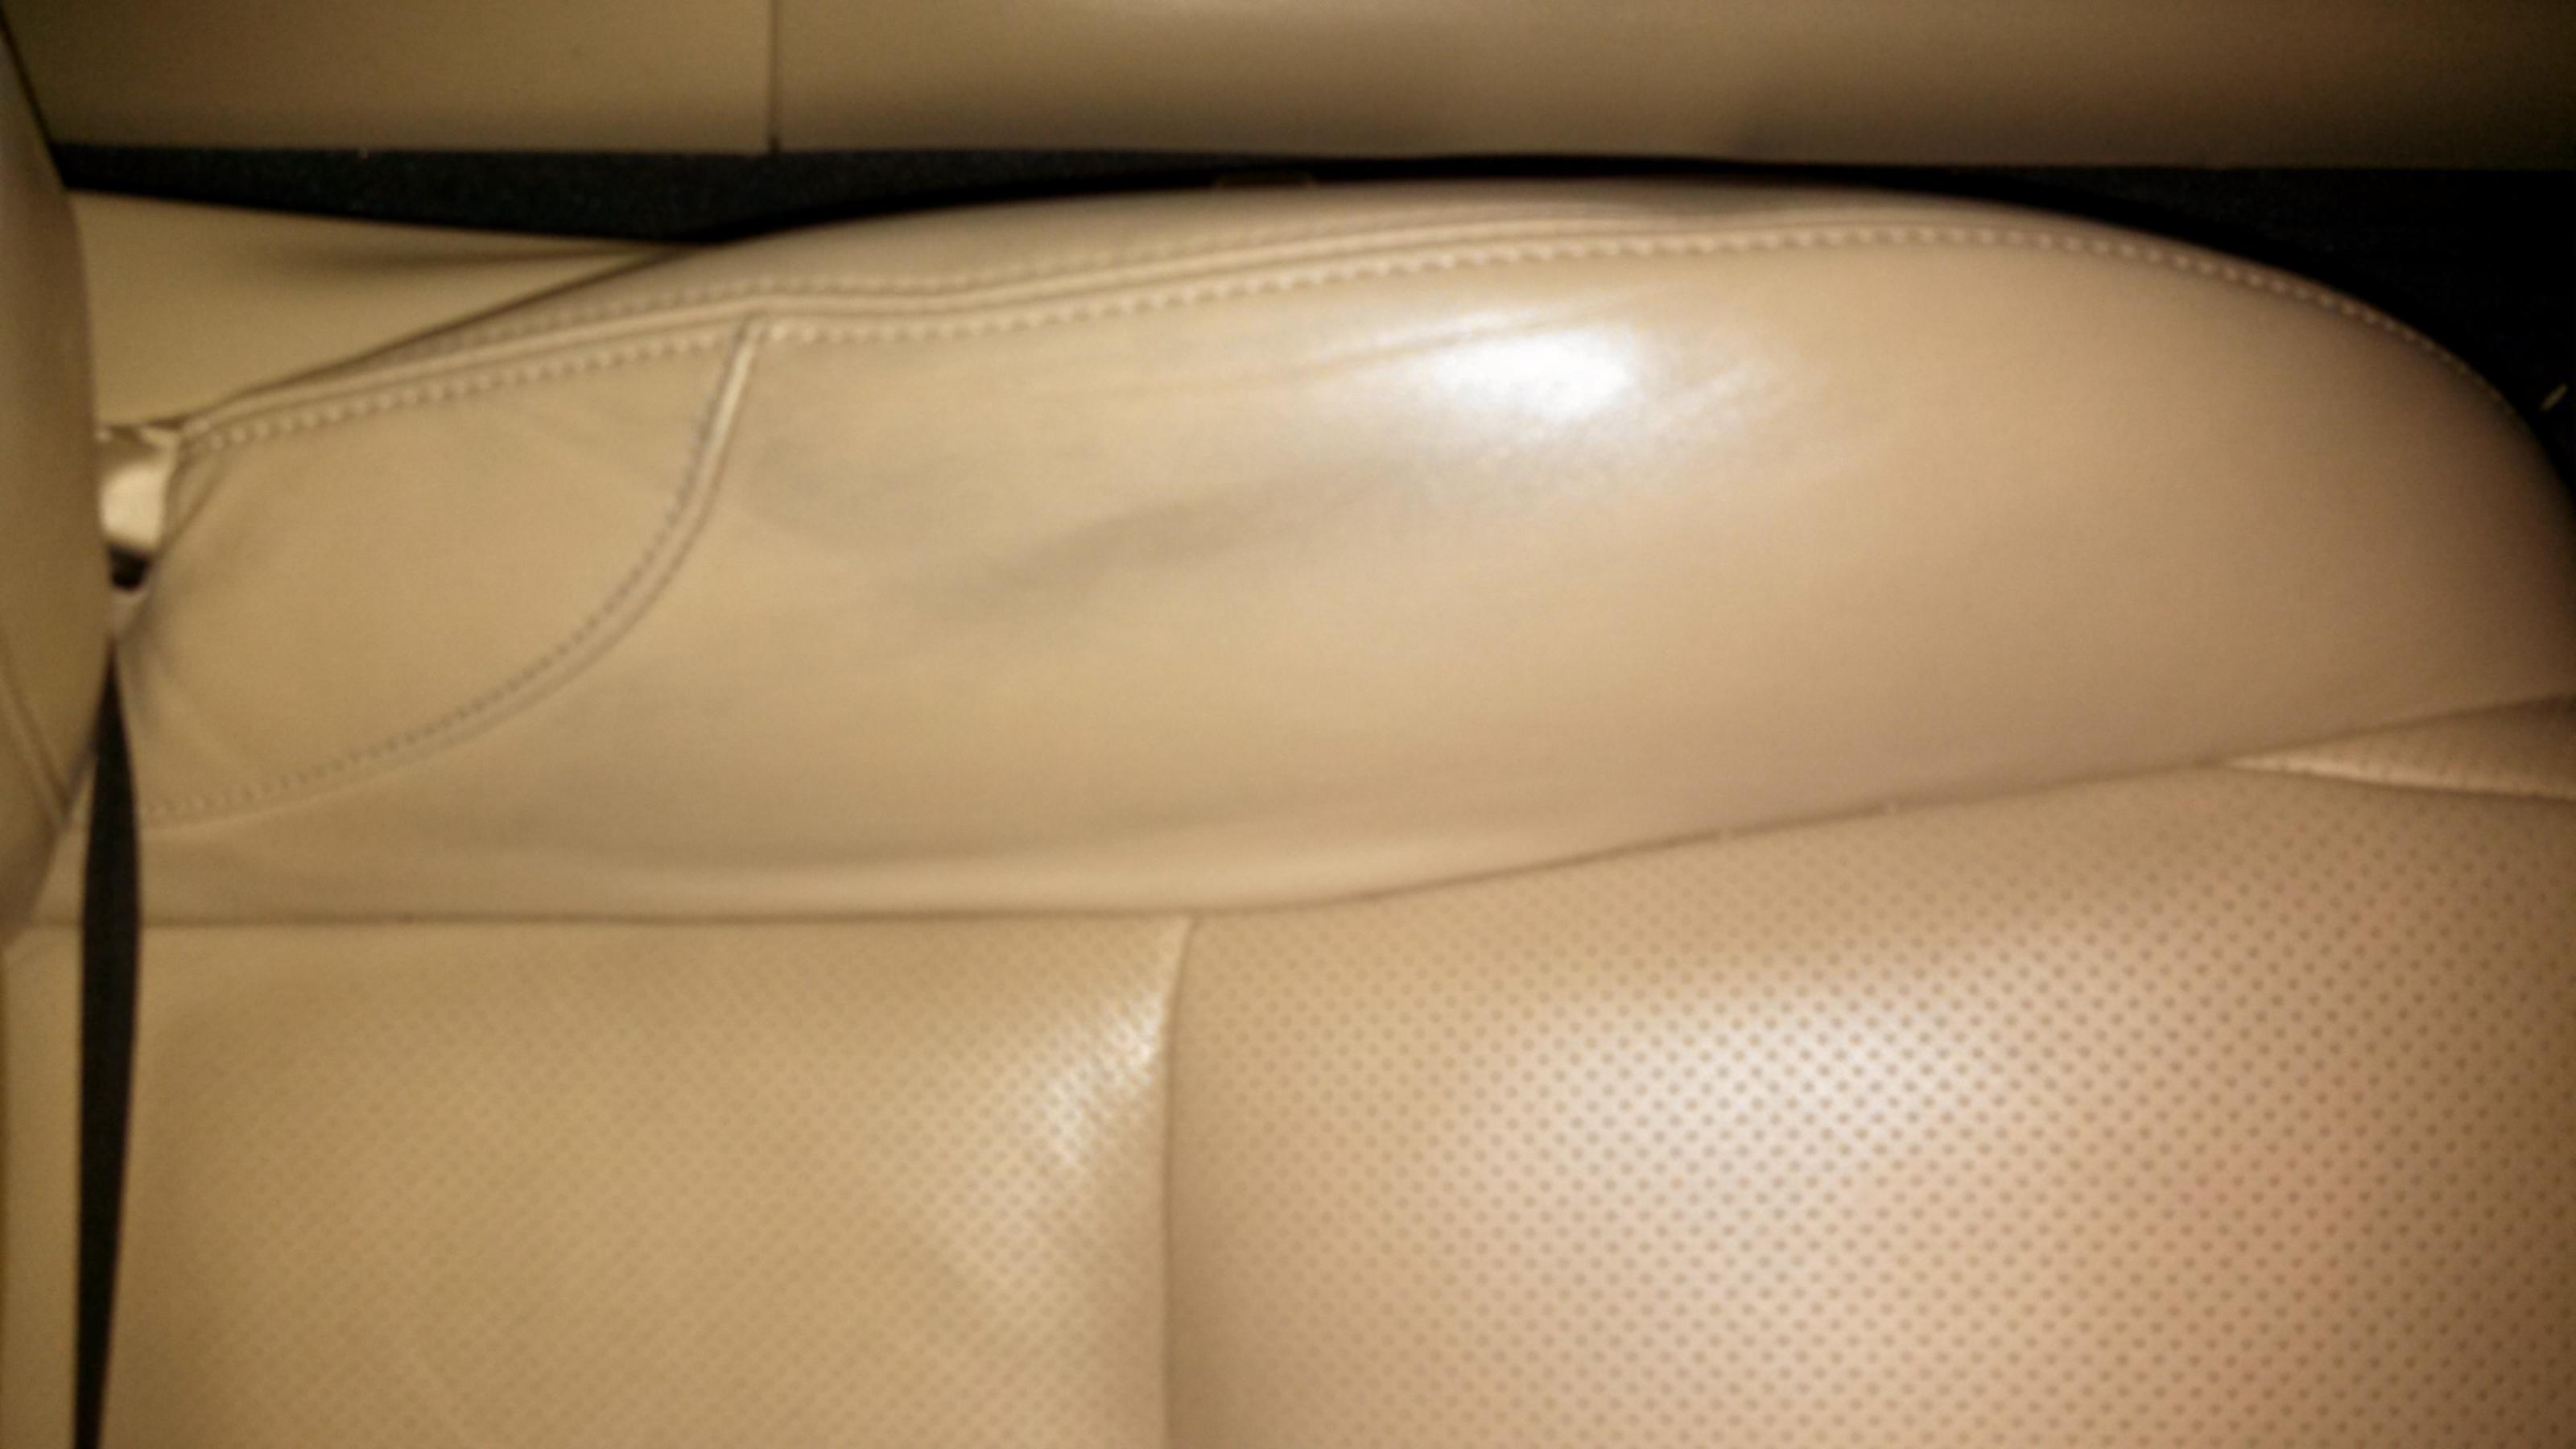 Looking for suggestions on removing blue jean stain on tan leather